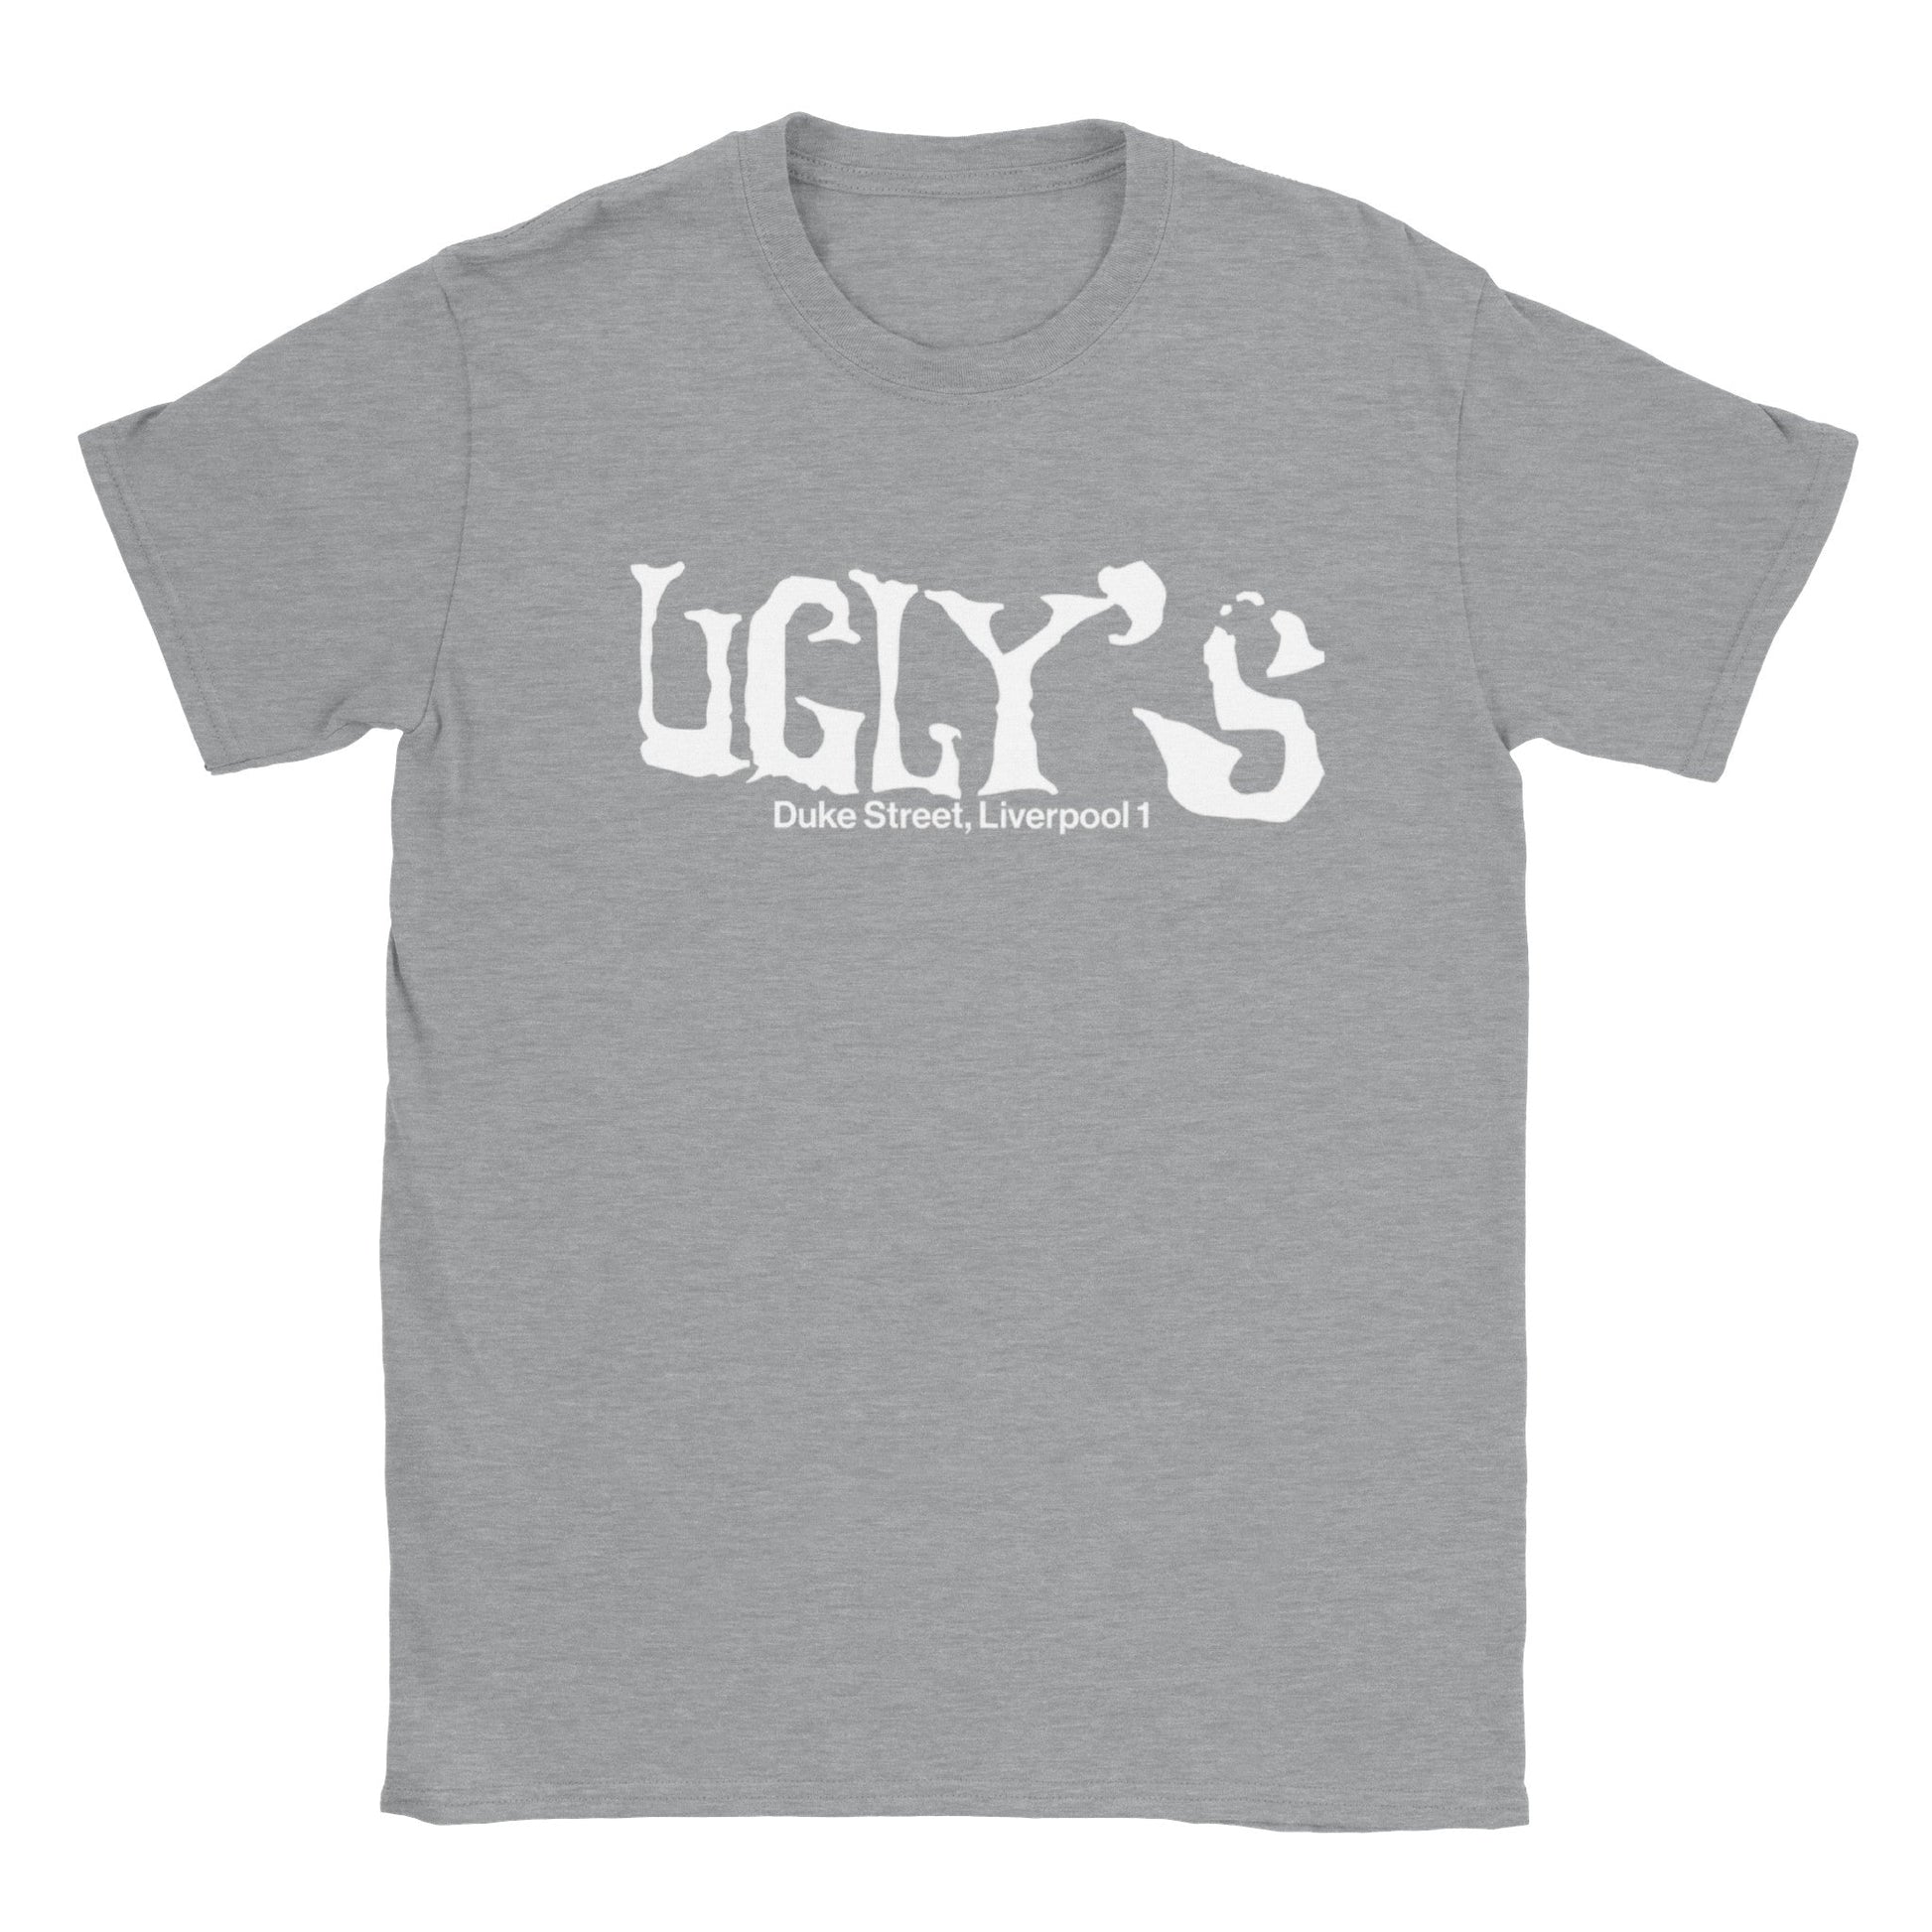 Uglys unisex T-shirt - various colours - Dirty Stop Outs